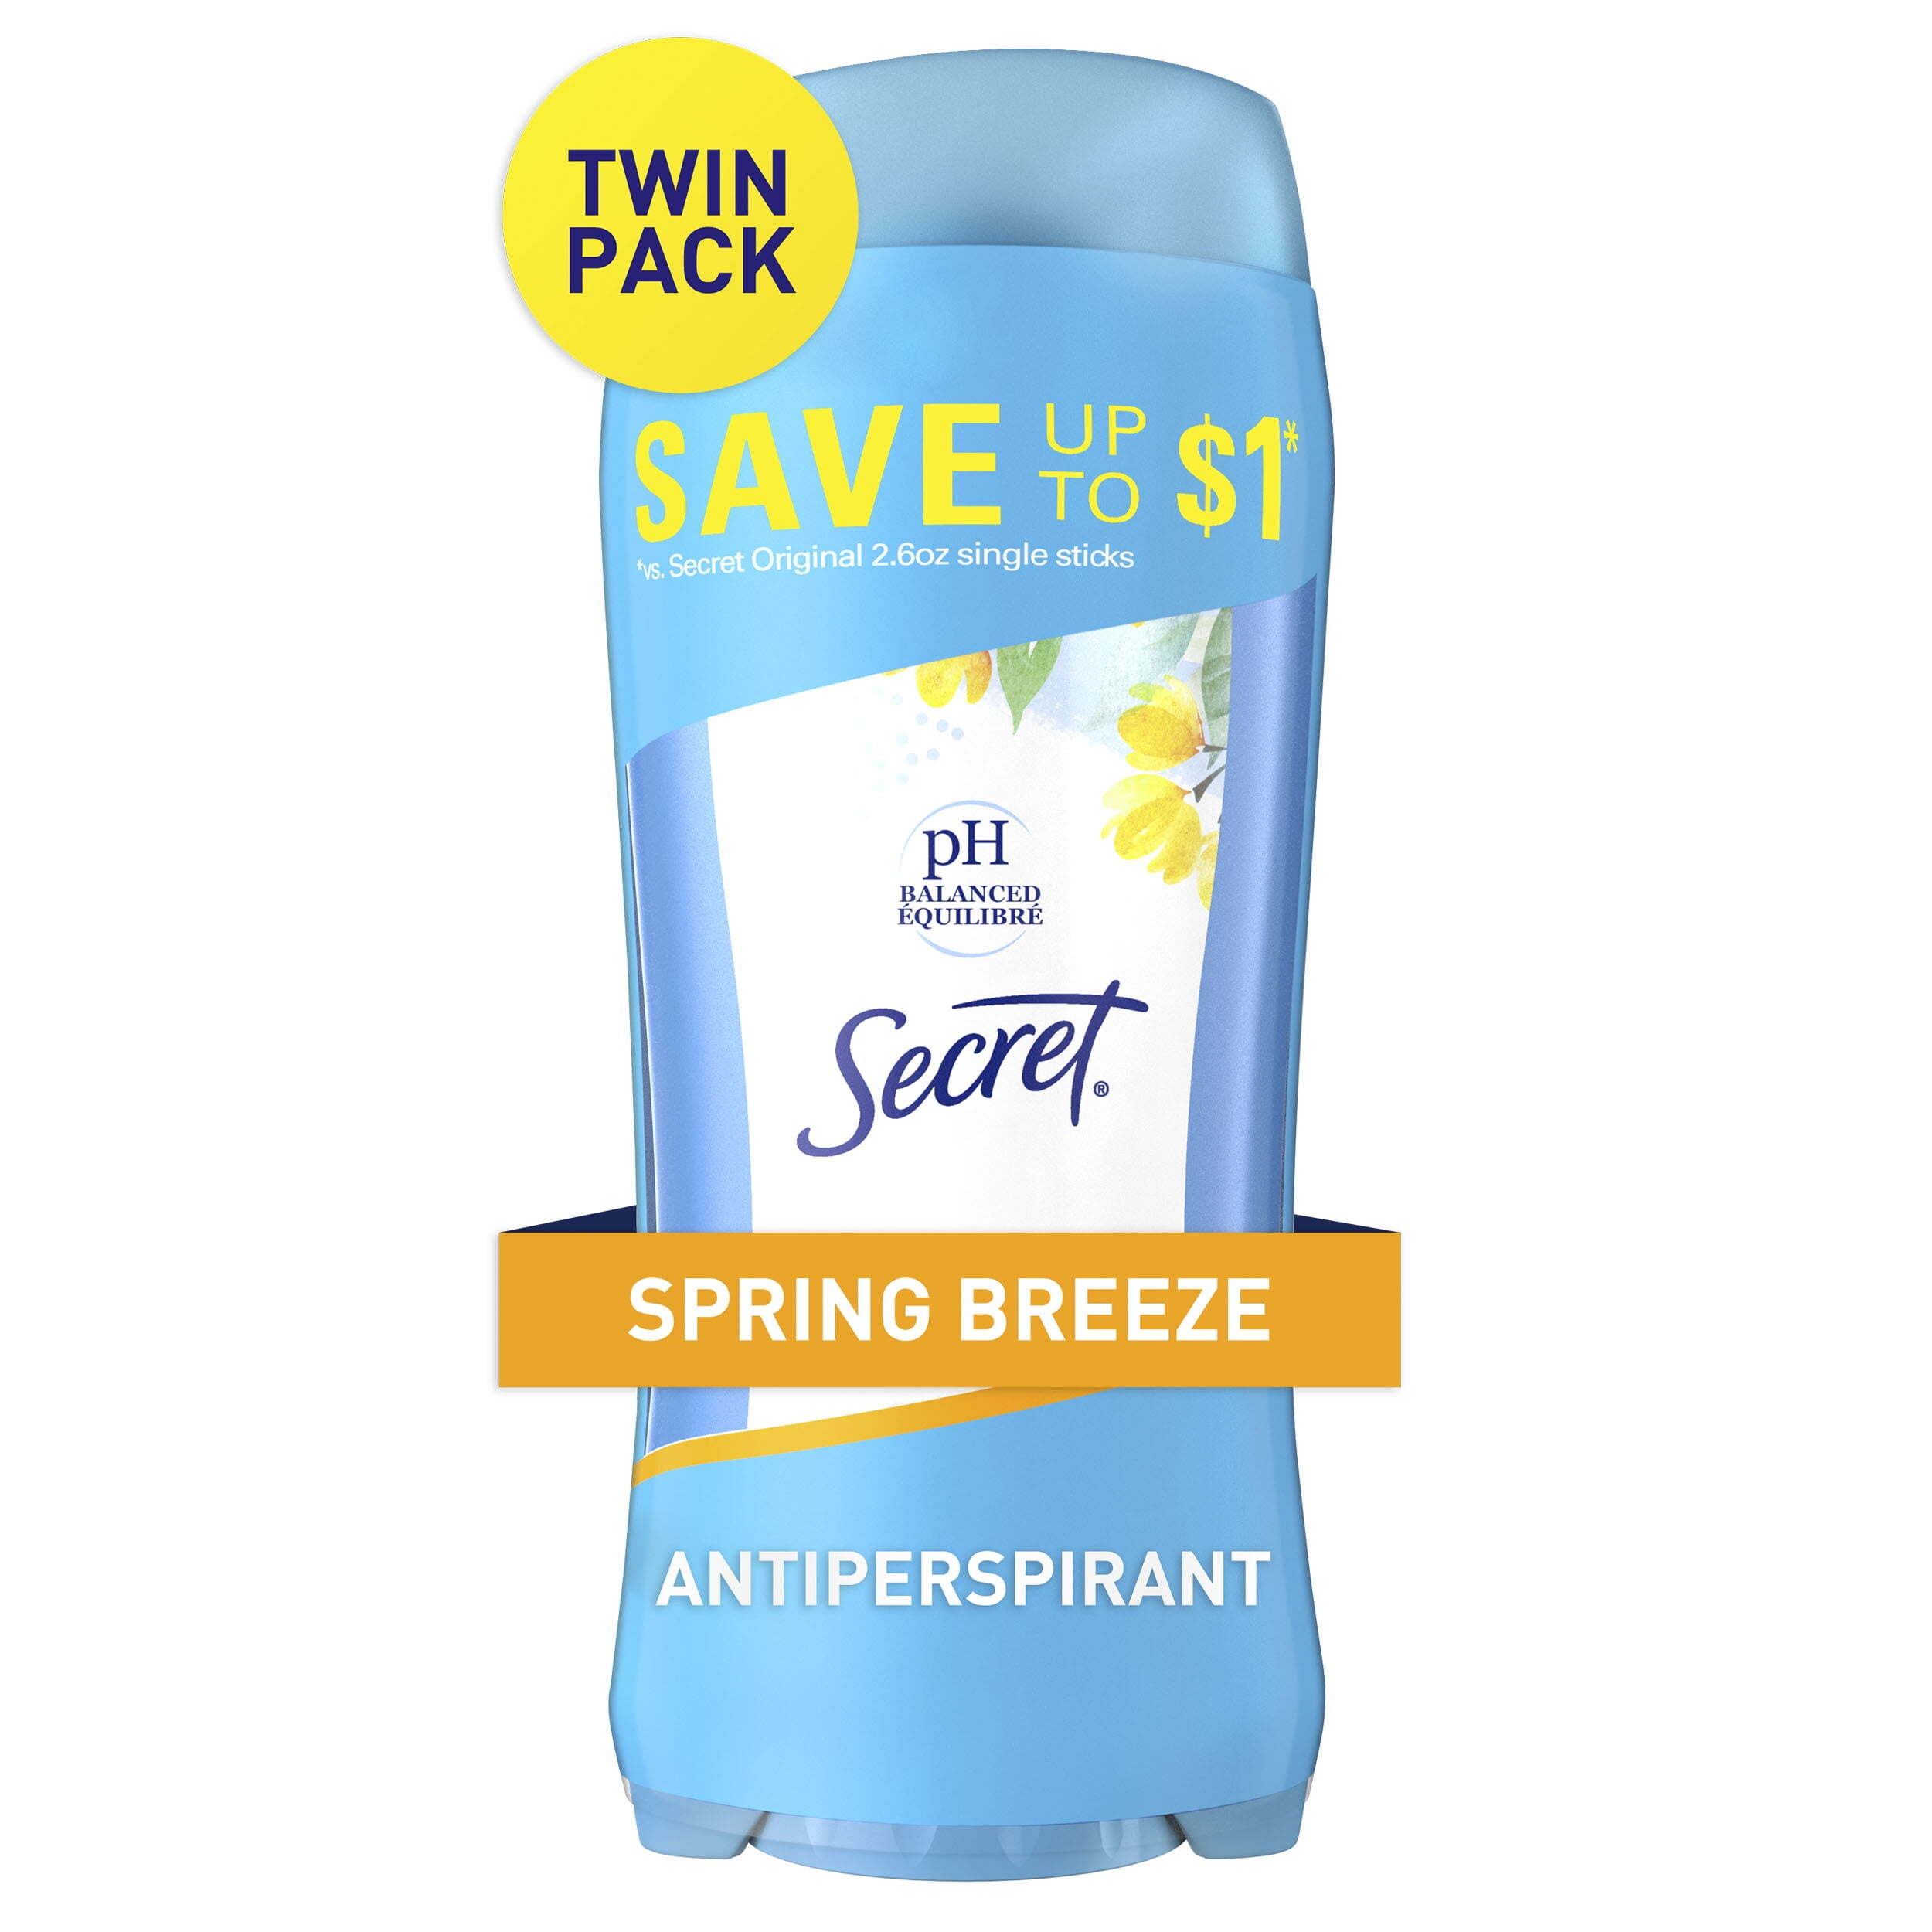 Secret Invisible Solid Antiperspirant and Deodorant, Spring Breeze,  2.6 oz , Twin Pack - image 1 of 8